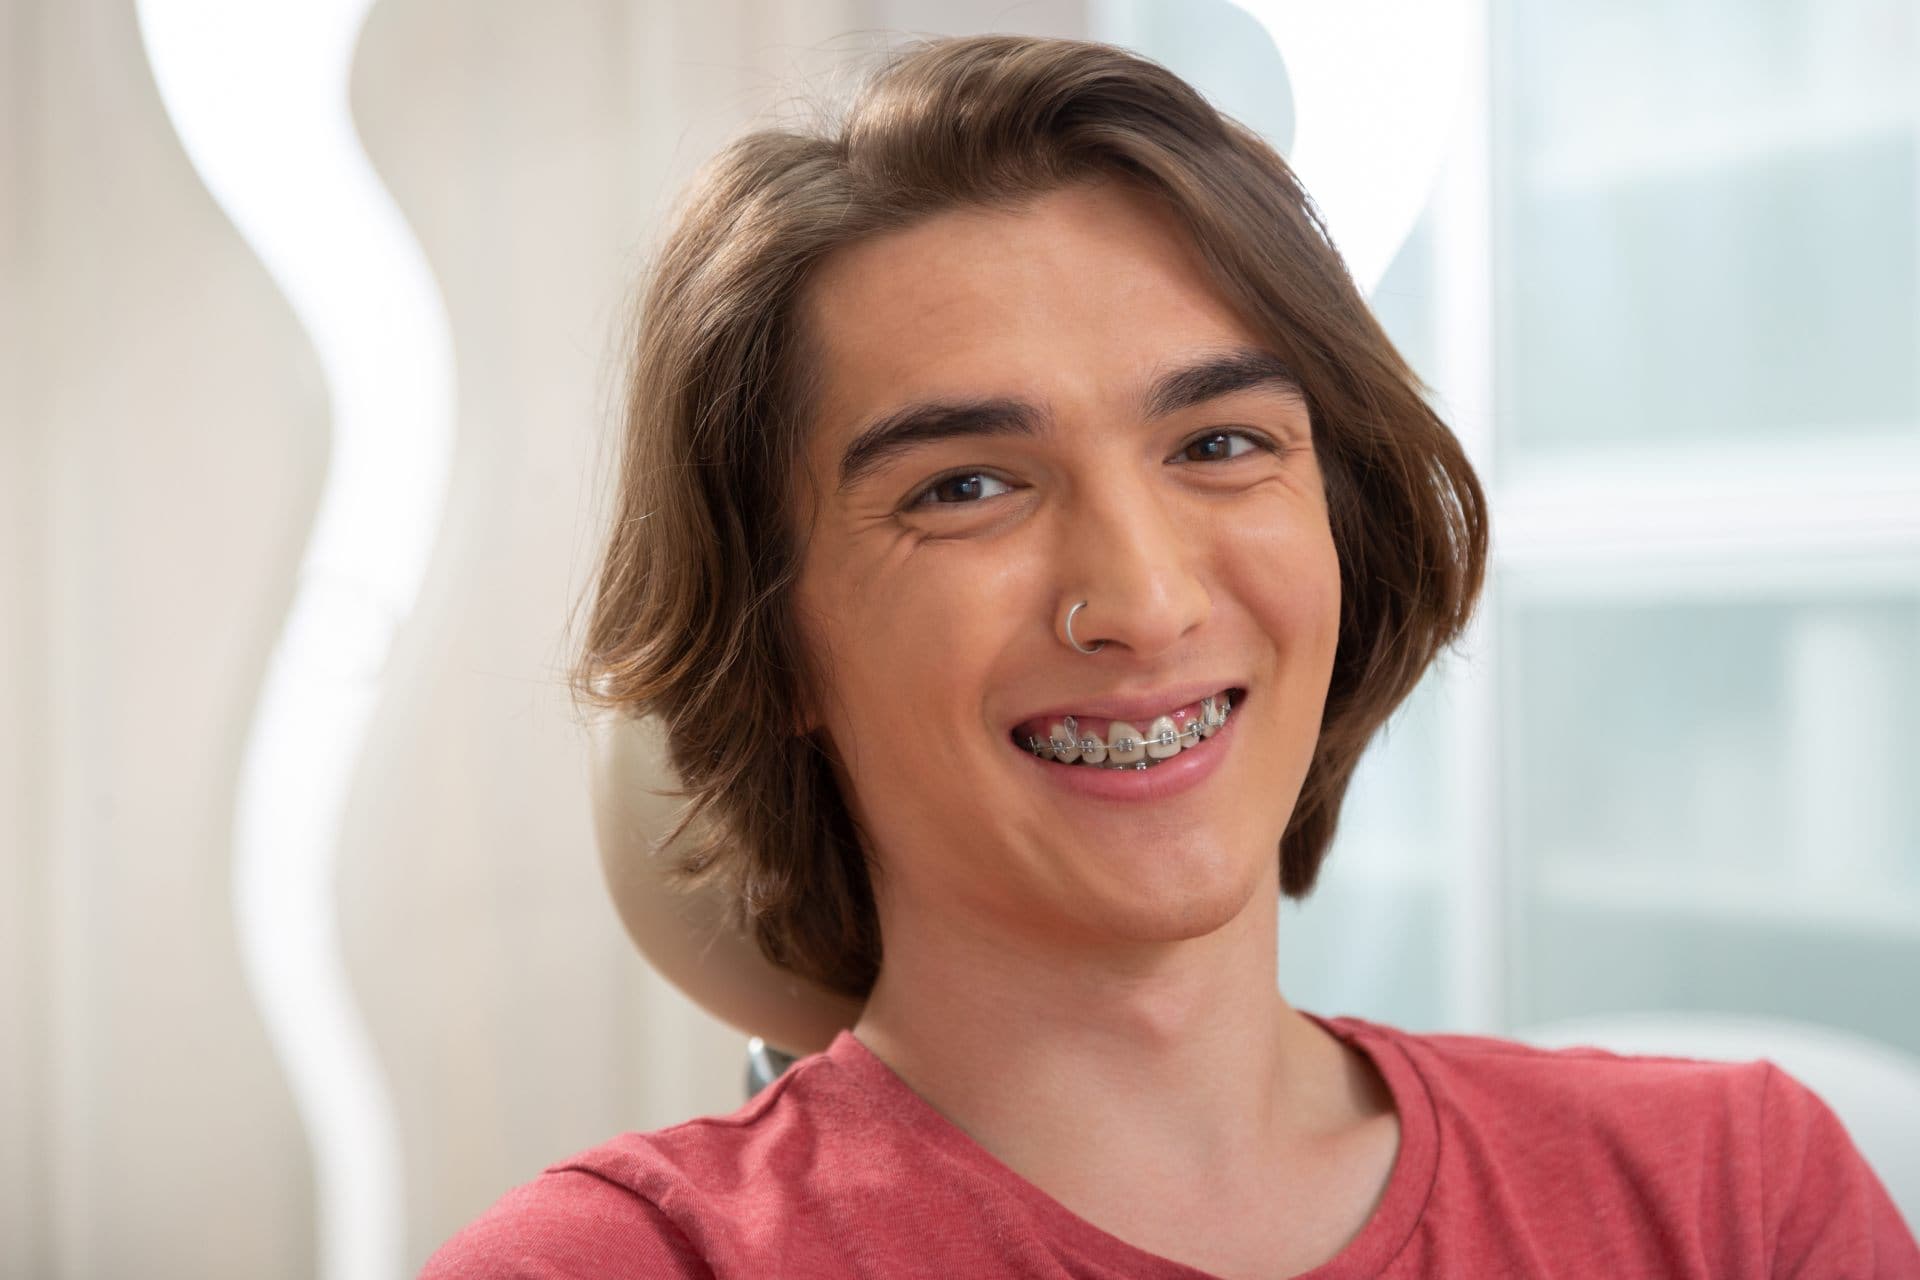 Teen boy with braces smiling in an orthodontic office.